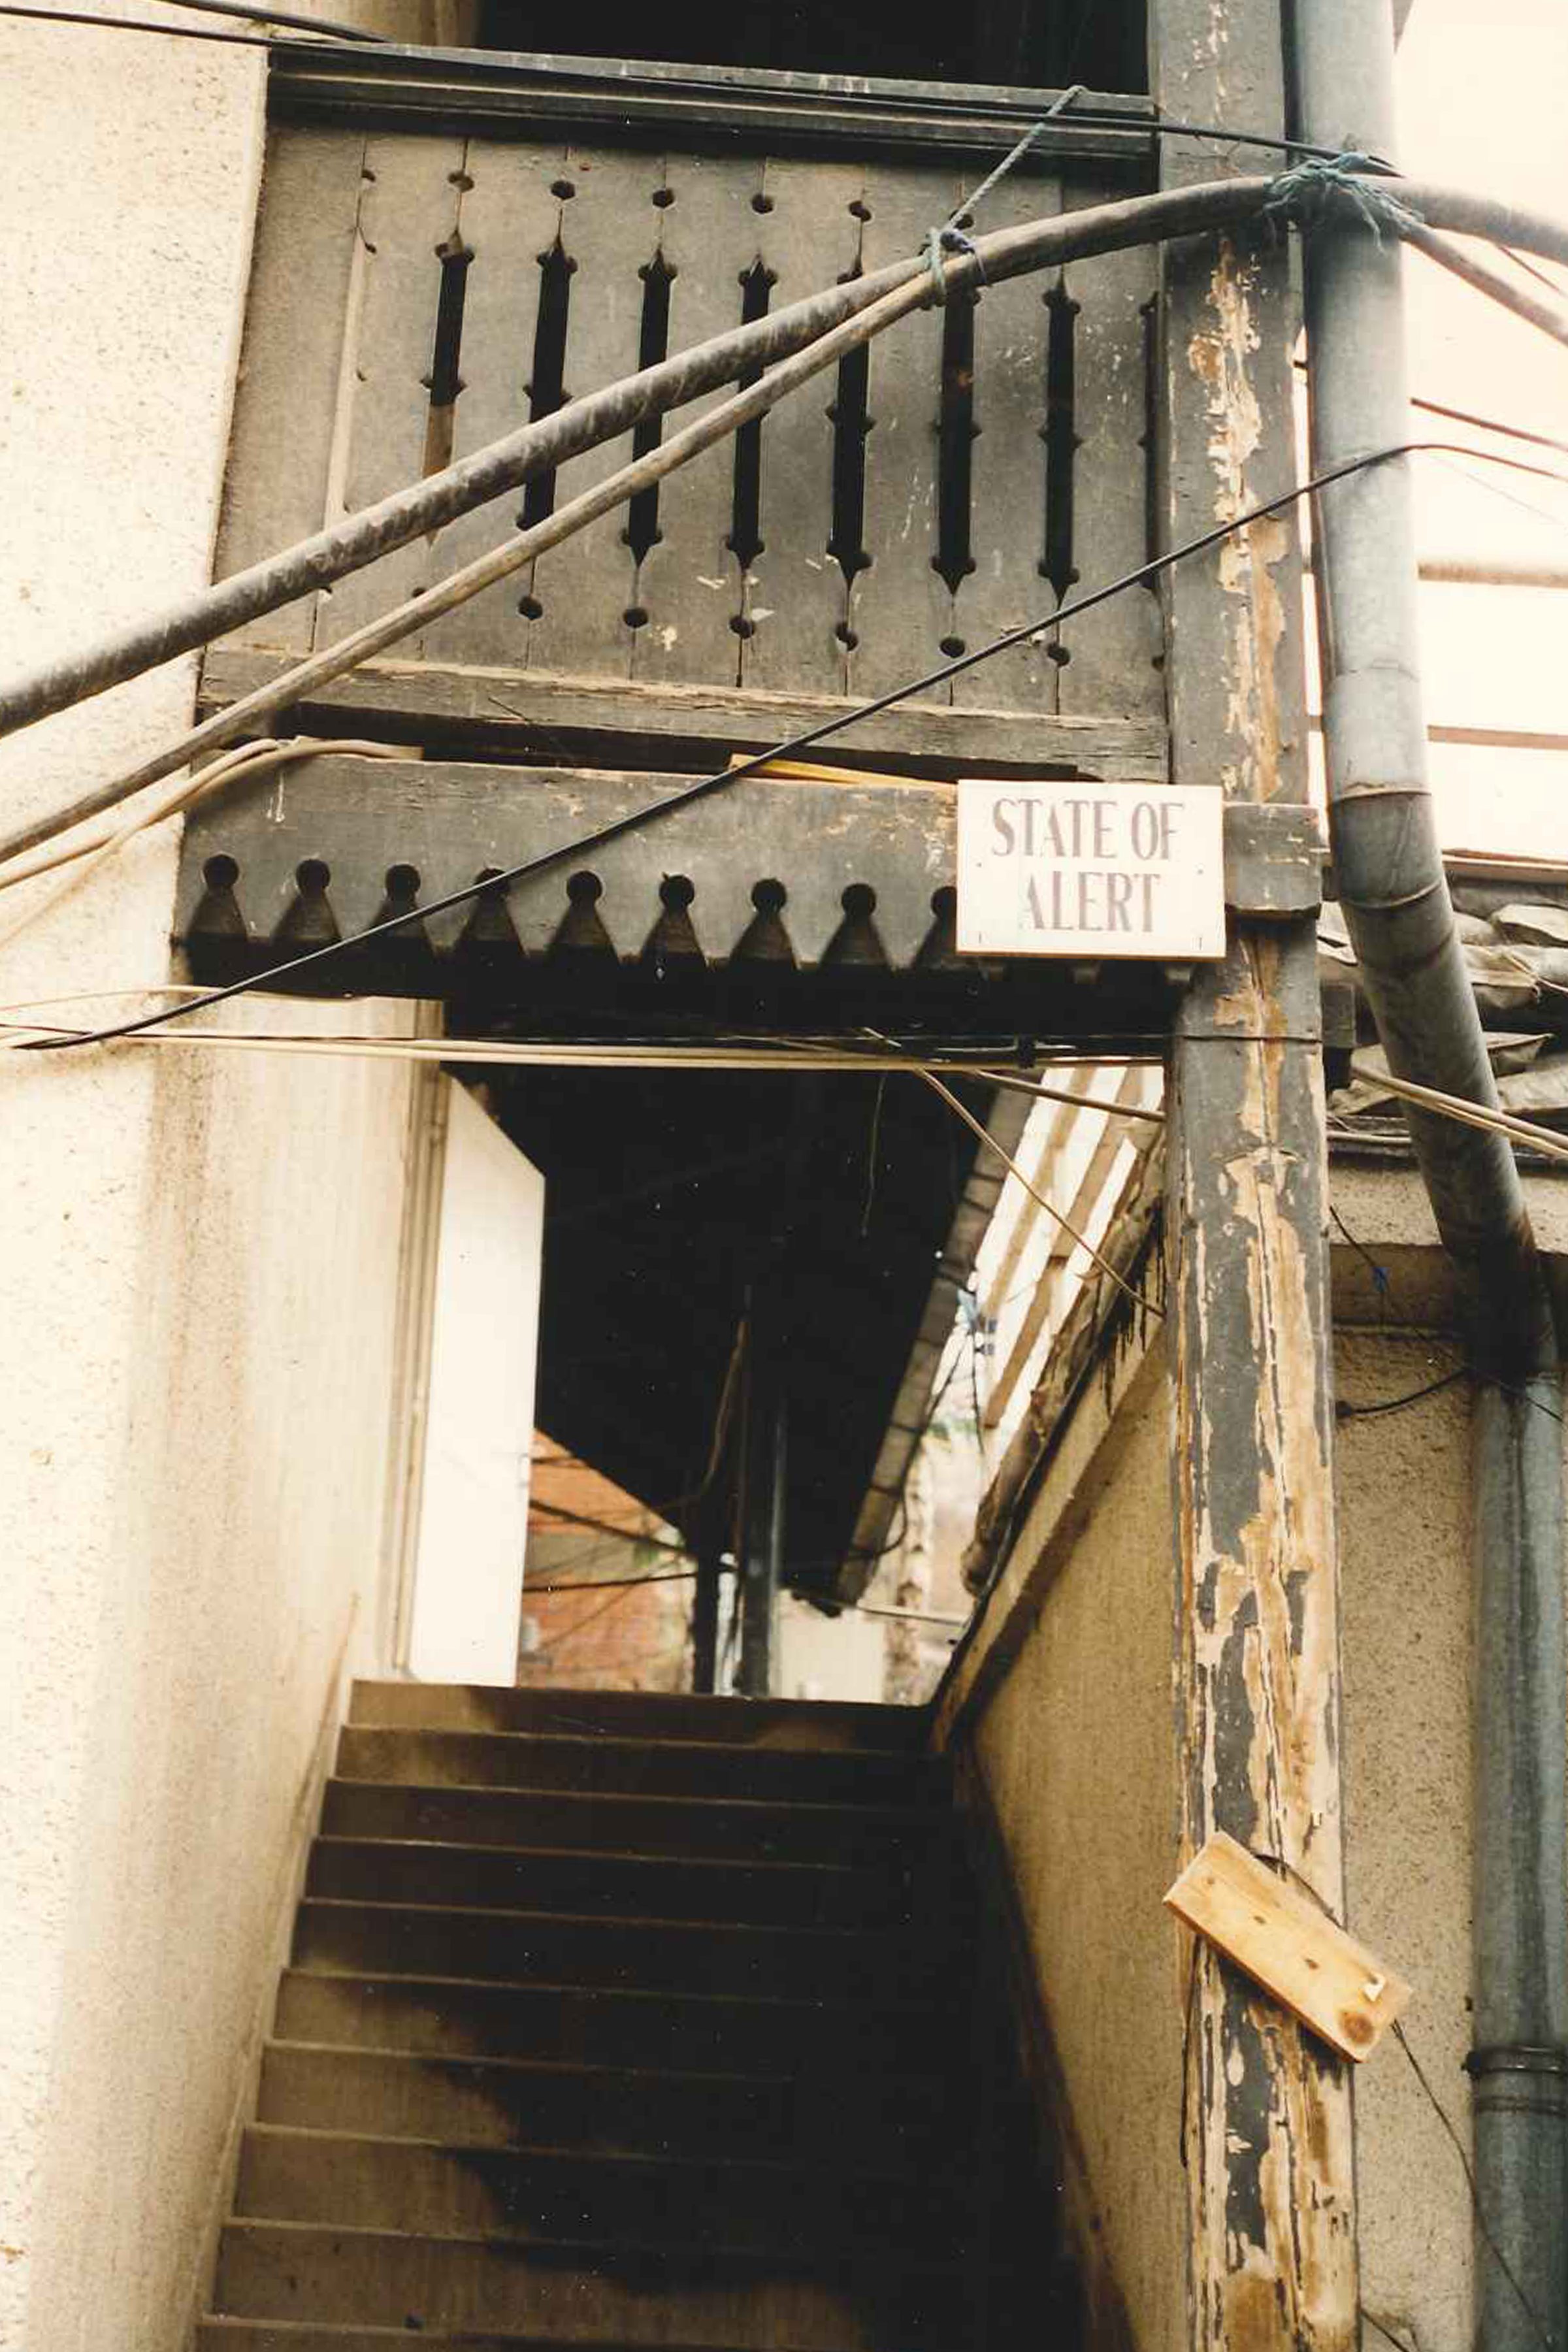 Stairway with sign reading, "State of alert"